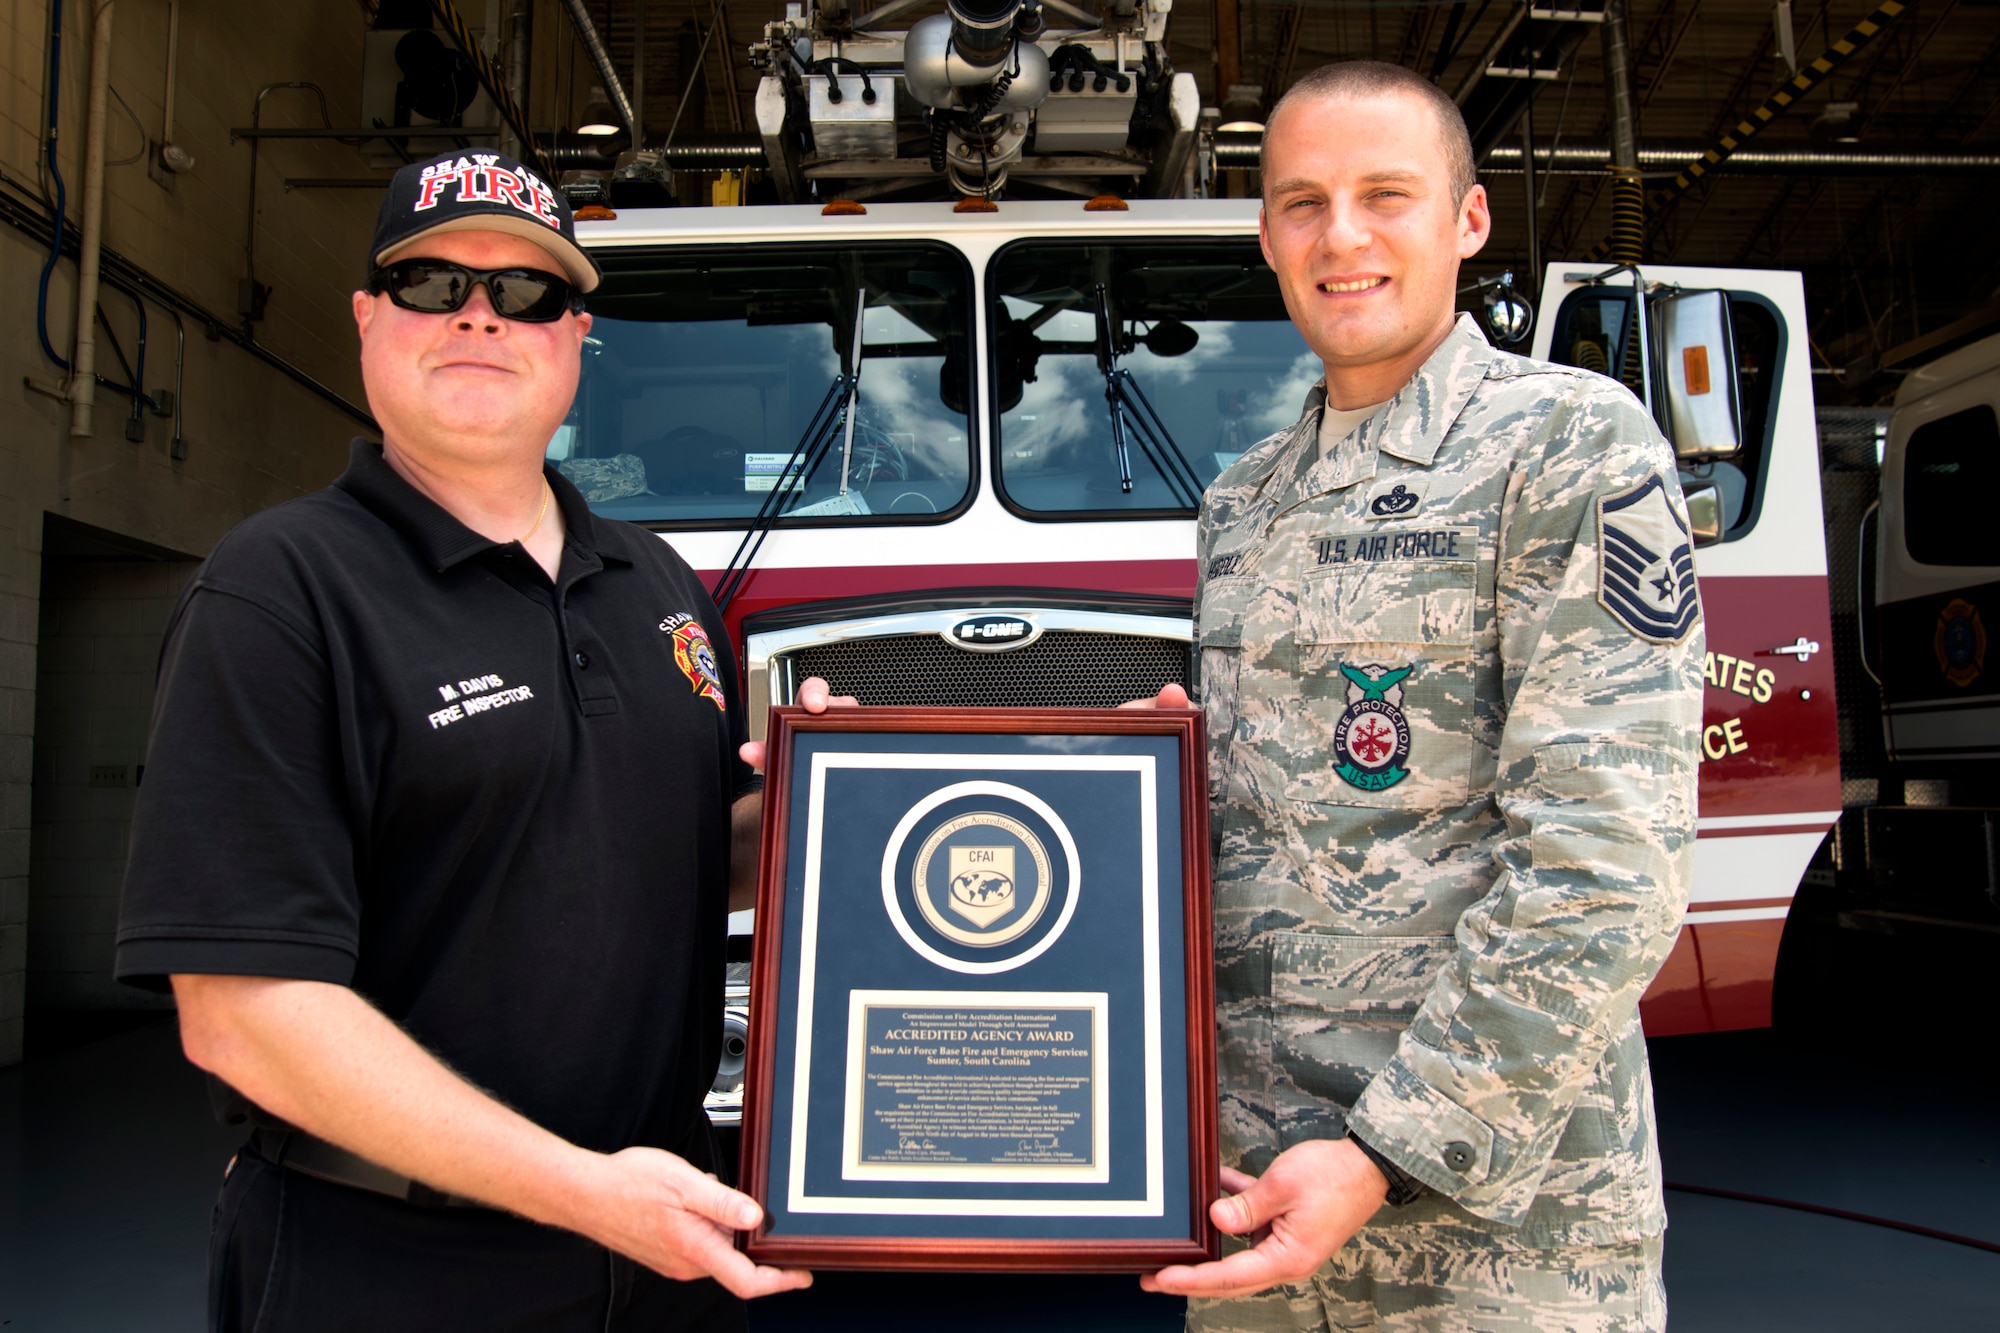 U.S. Air Force Master Sgt. Aaron Huddle, 20th Civil Engineer Squadron (CES) assistant fire protection chief, right, and Michael Davis, 20th CES fire inspector and accreditation manager, hold a Commission on Fire Accreditation International (CFAI) Accredited Agency Award at Shaw Air Force Base, South Carolina, Aug. 14, 2019.